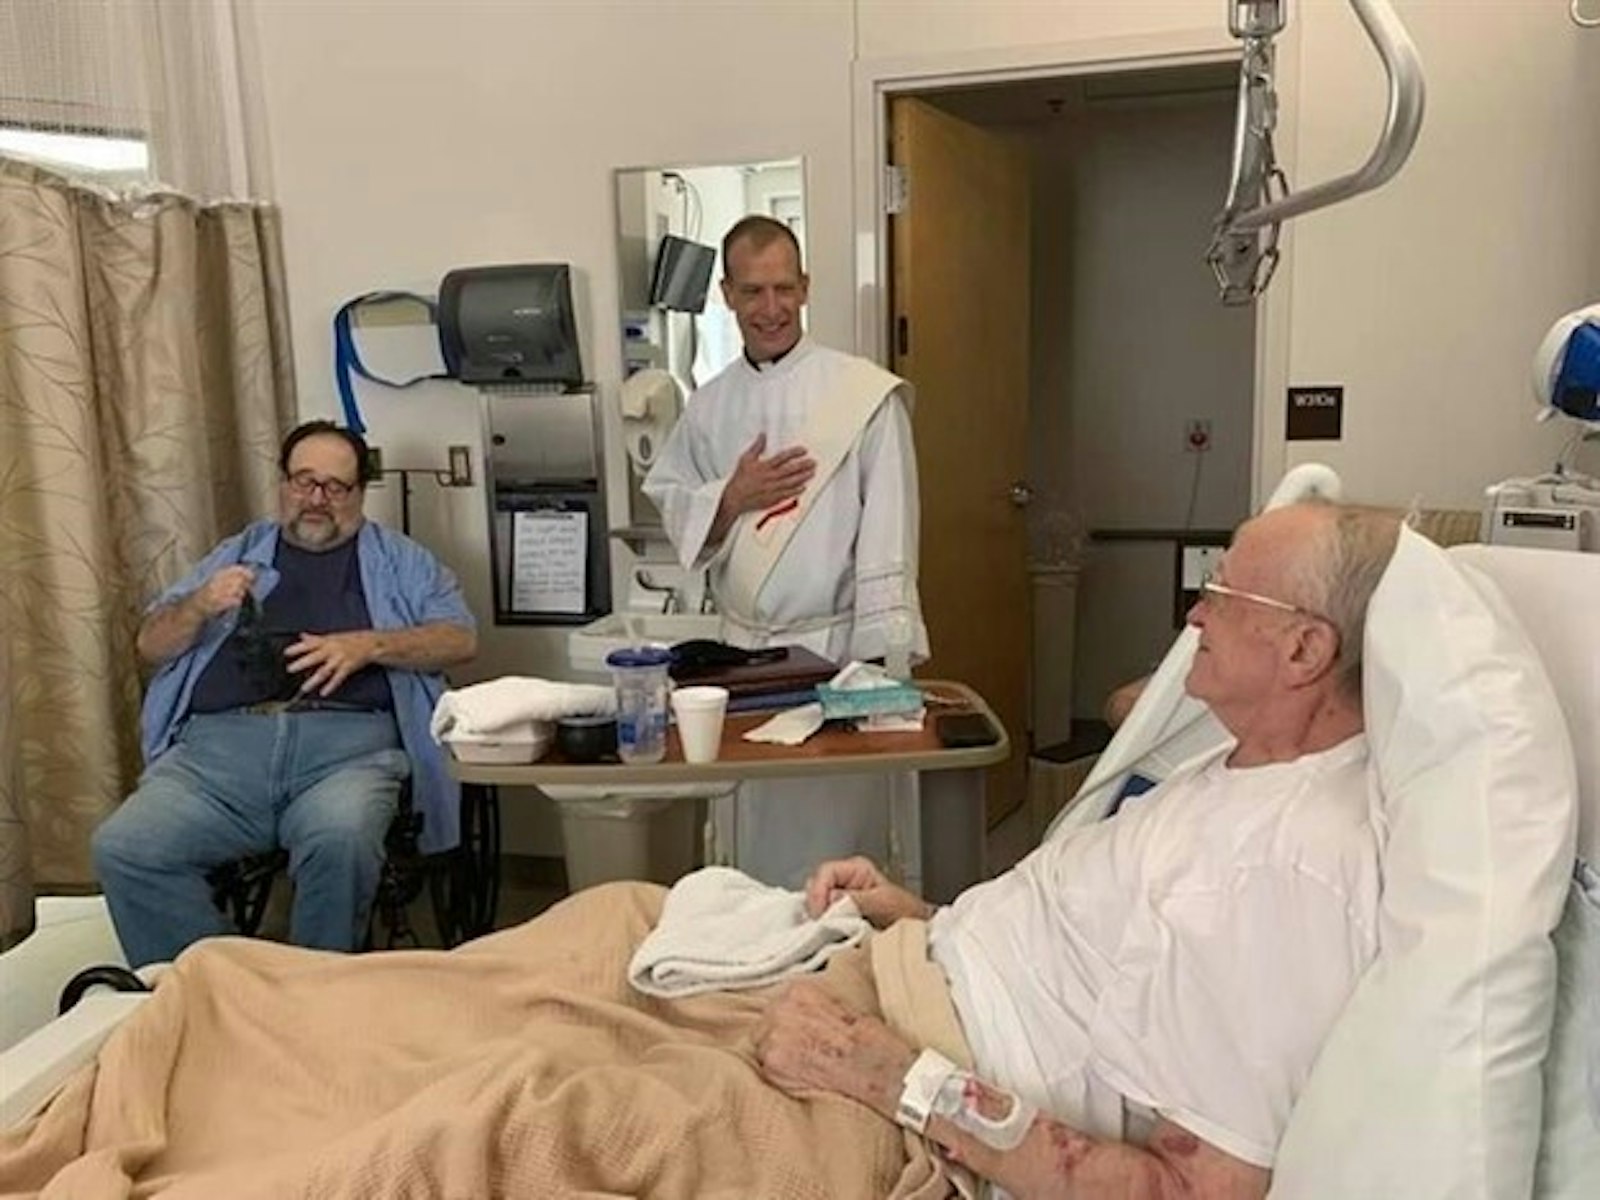 Dennis Ashby, left, after a deacon baptized one of two of his friends last August in his Iowa hospice. (Pictures courtesy of Carolyn Ashby)